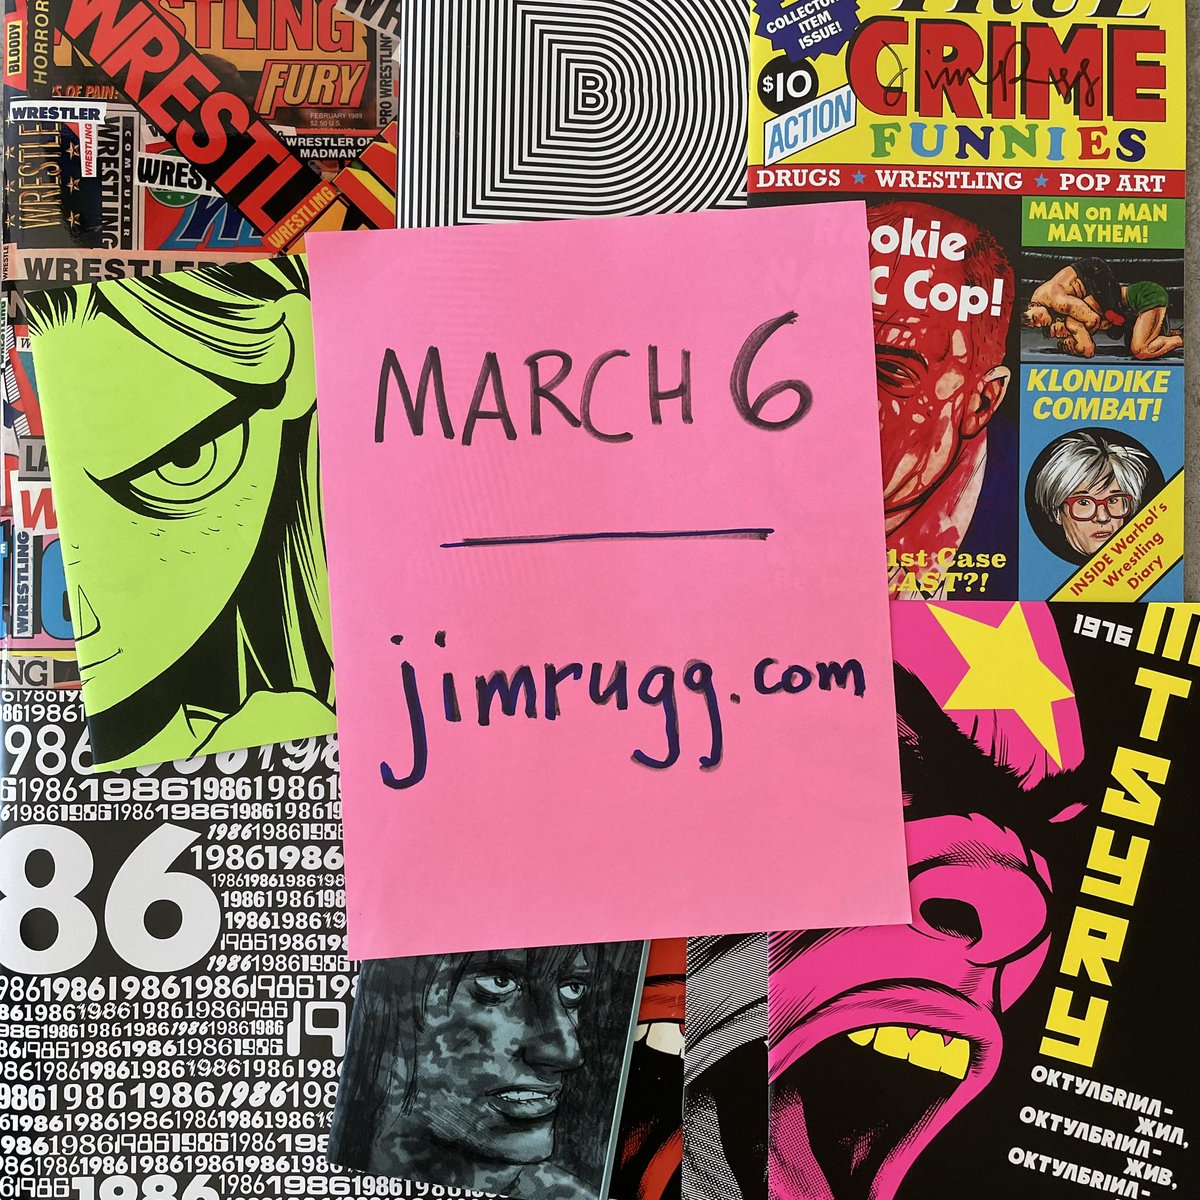 SPRING BREAK SALE! Starts Wednesday, 3/6. If you missed any of my zines or comics last fall — this is your chance. 1986 zine, BW, True Crime Funnies, Rambo, Wrestling…tell a friend!